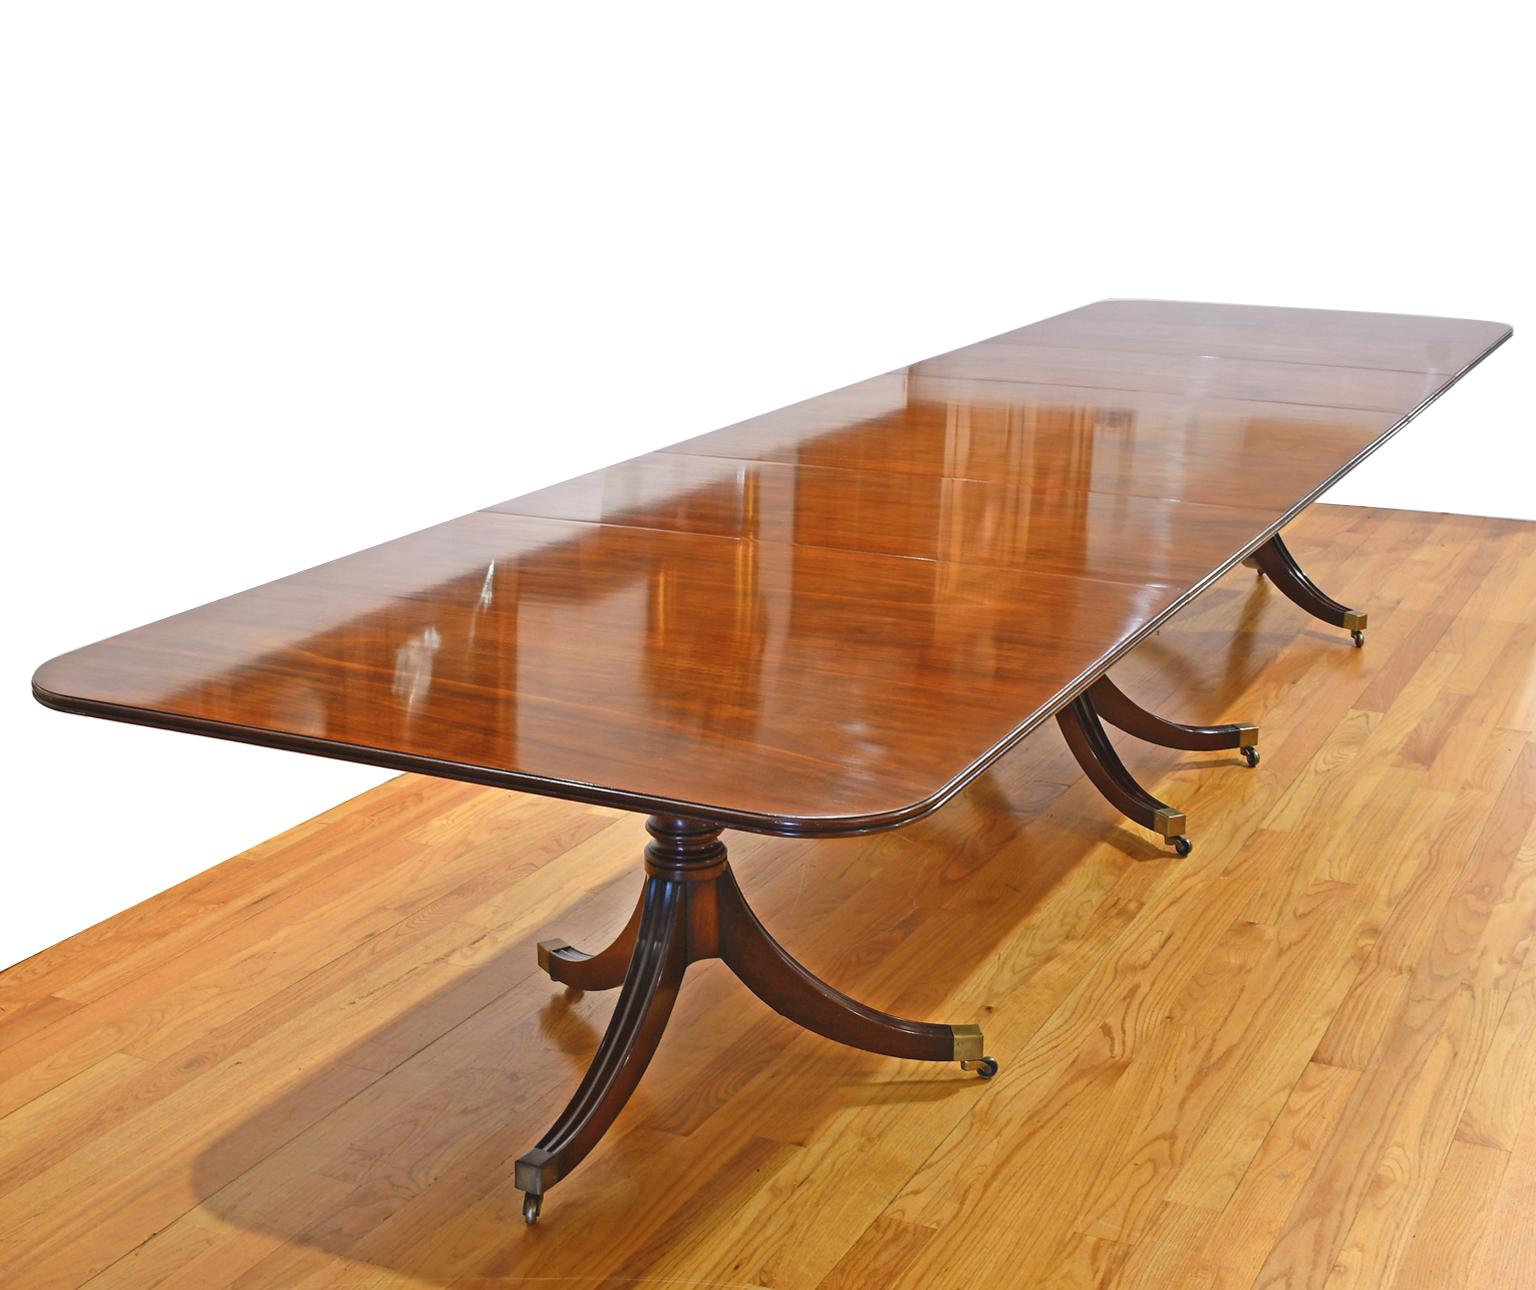 Regency 15' Antique English Banquet Dining Table in Mahogany w/ 3 Pedestals & 2 Leaves